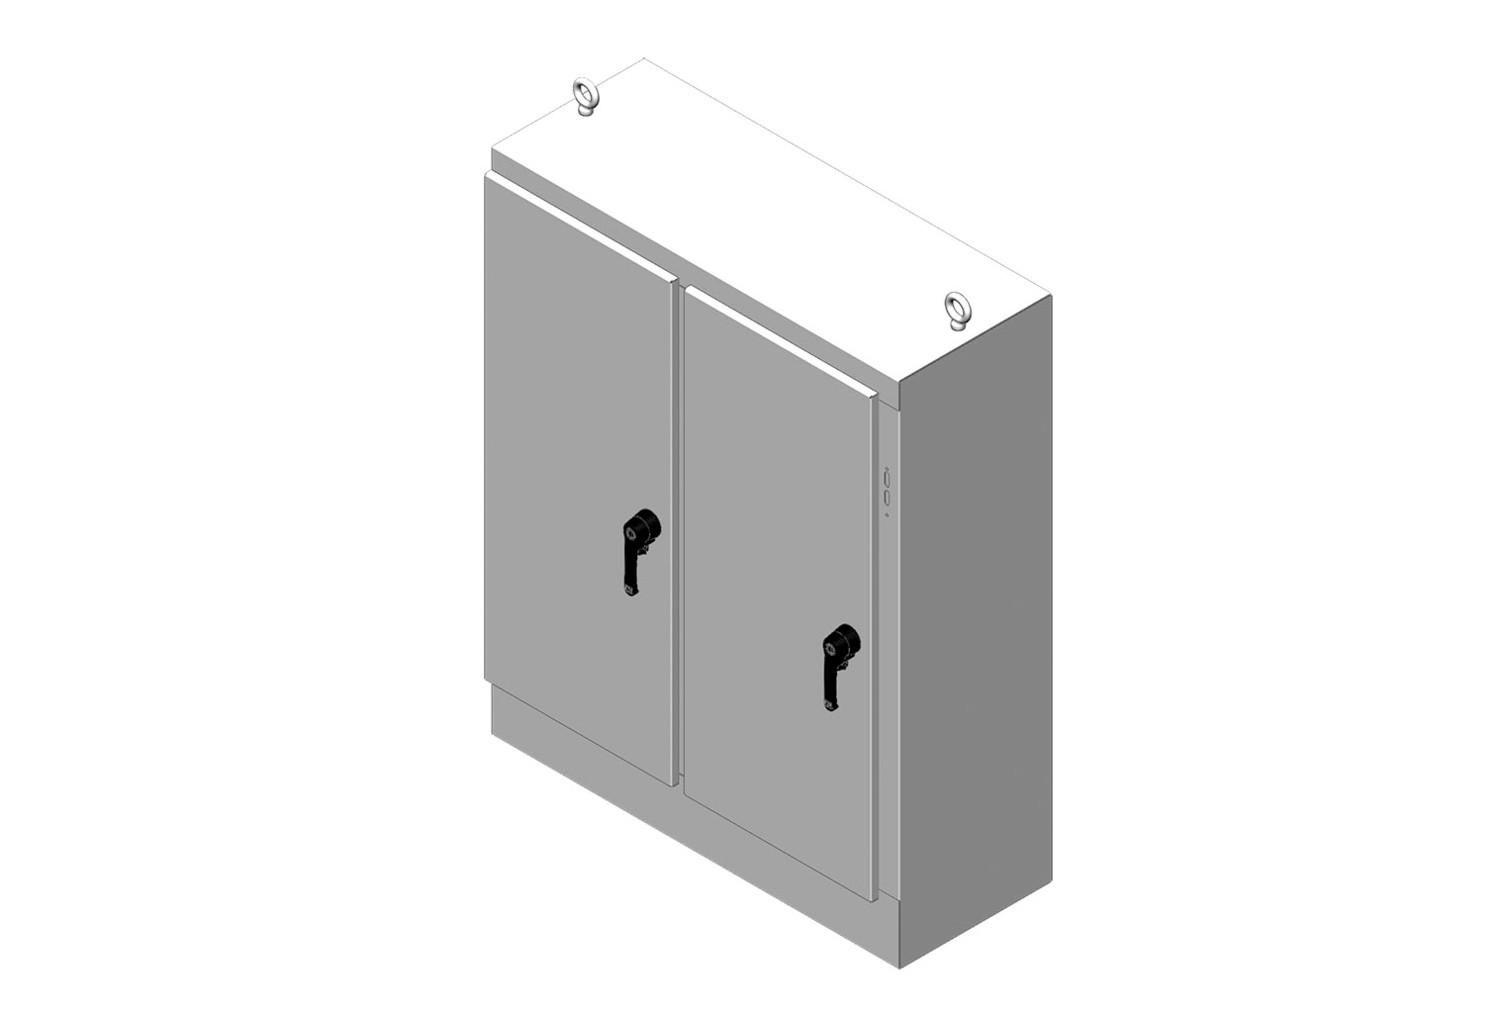 RMR Free-Standing Disconnect Enclosure, Type 4, with Solid Double Door - Image 2